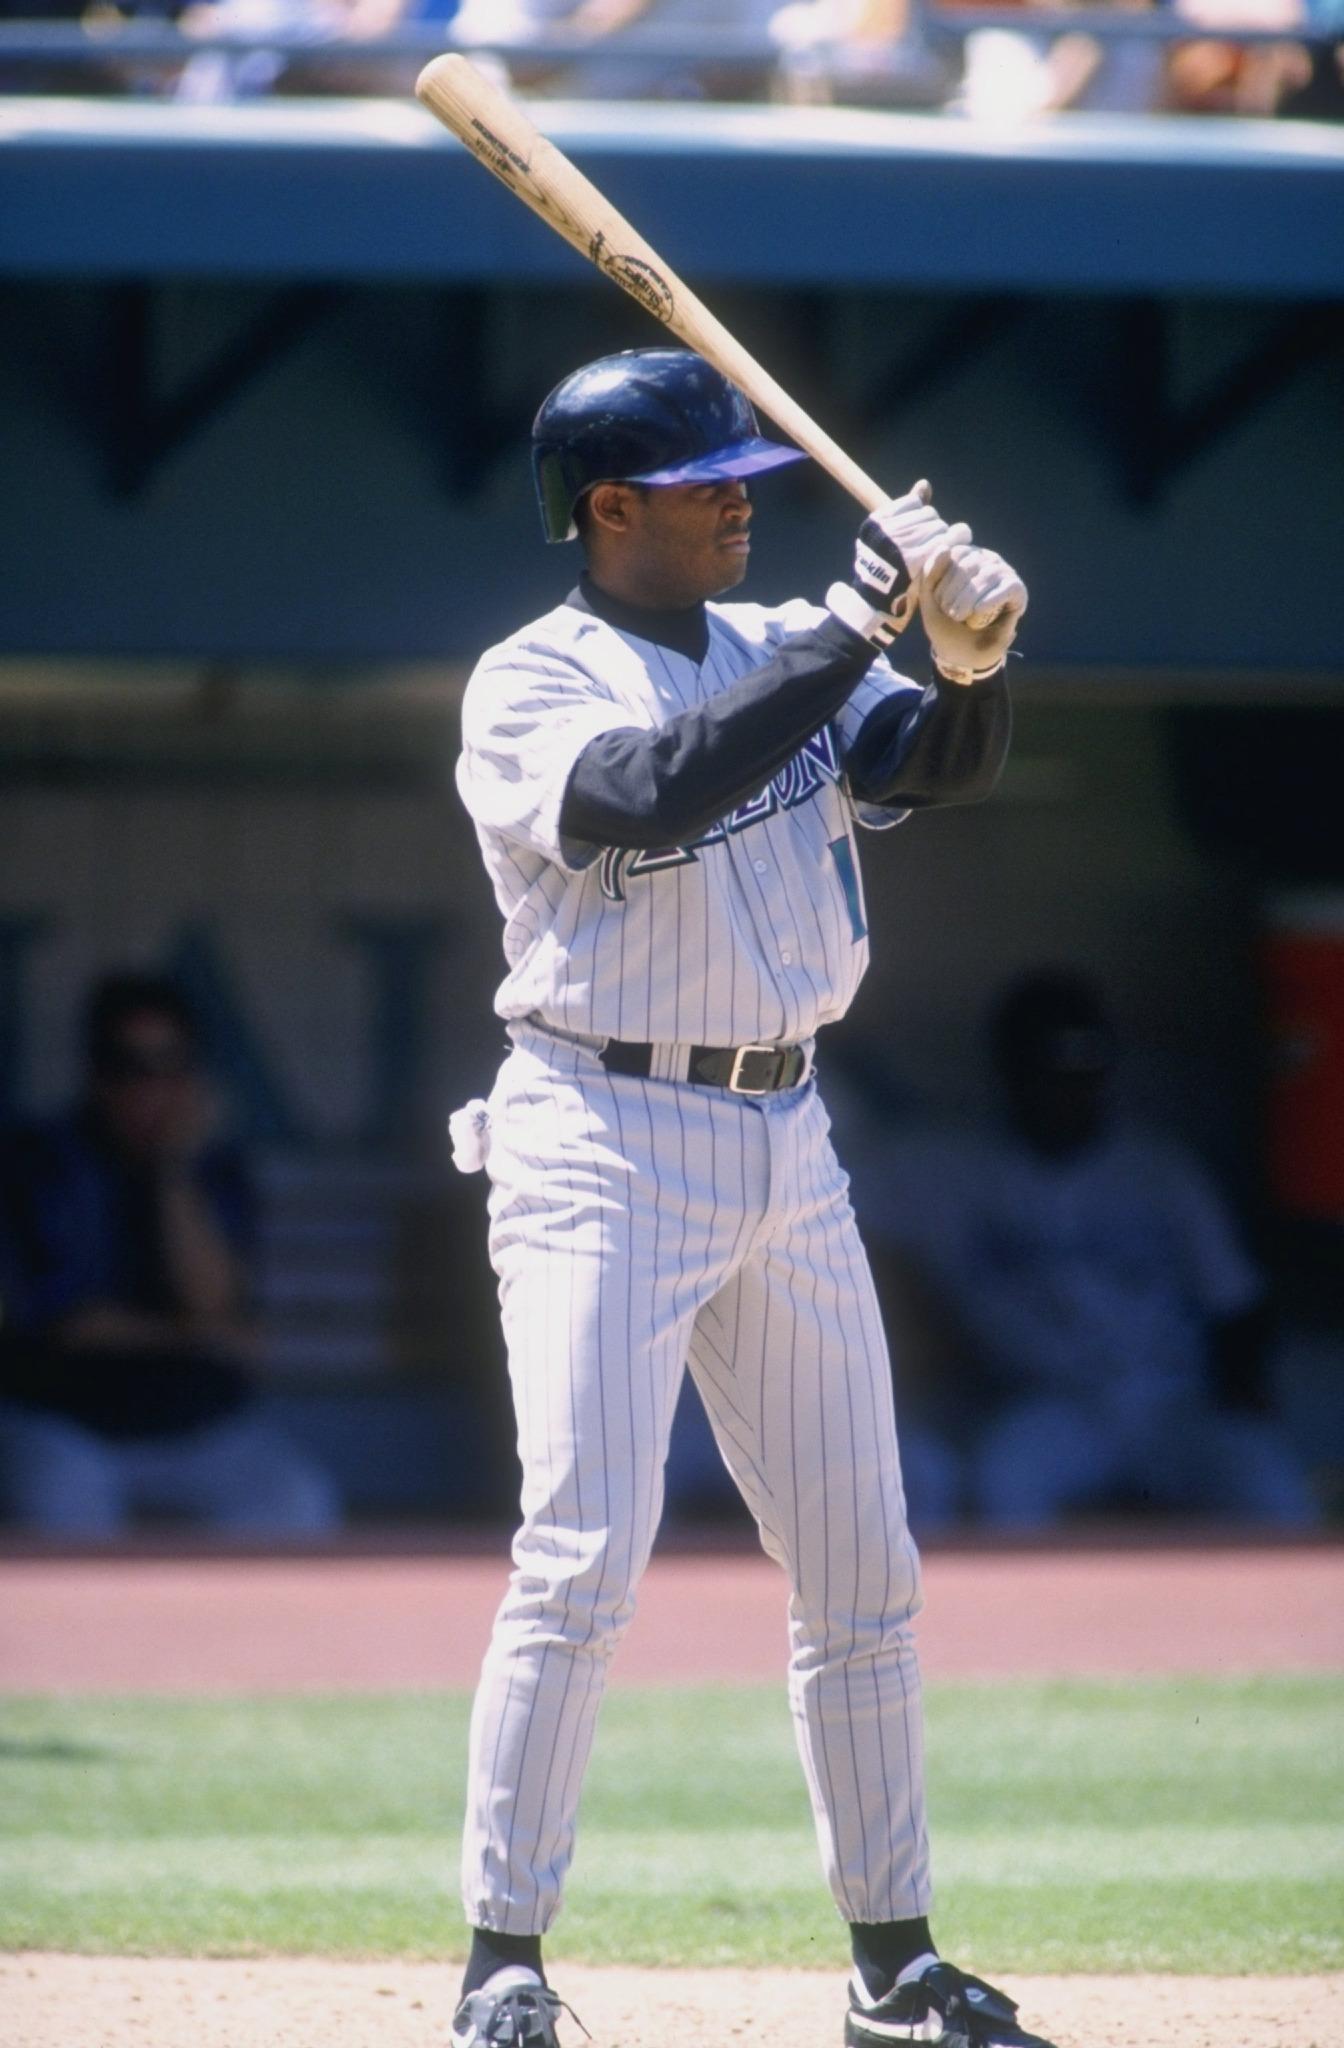 Happy 41st birthday to Tony Batista, who had one of our favorite batting stances of all time. 